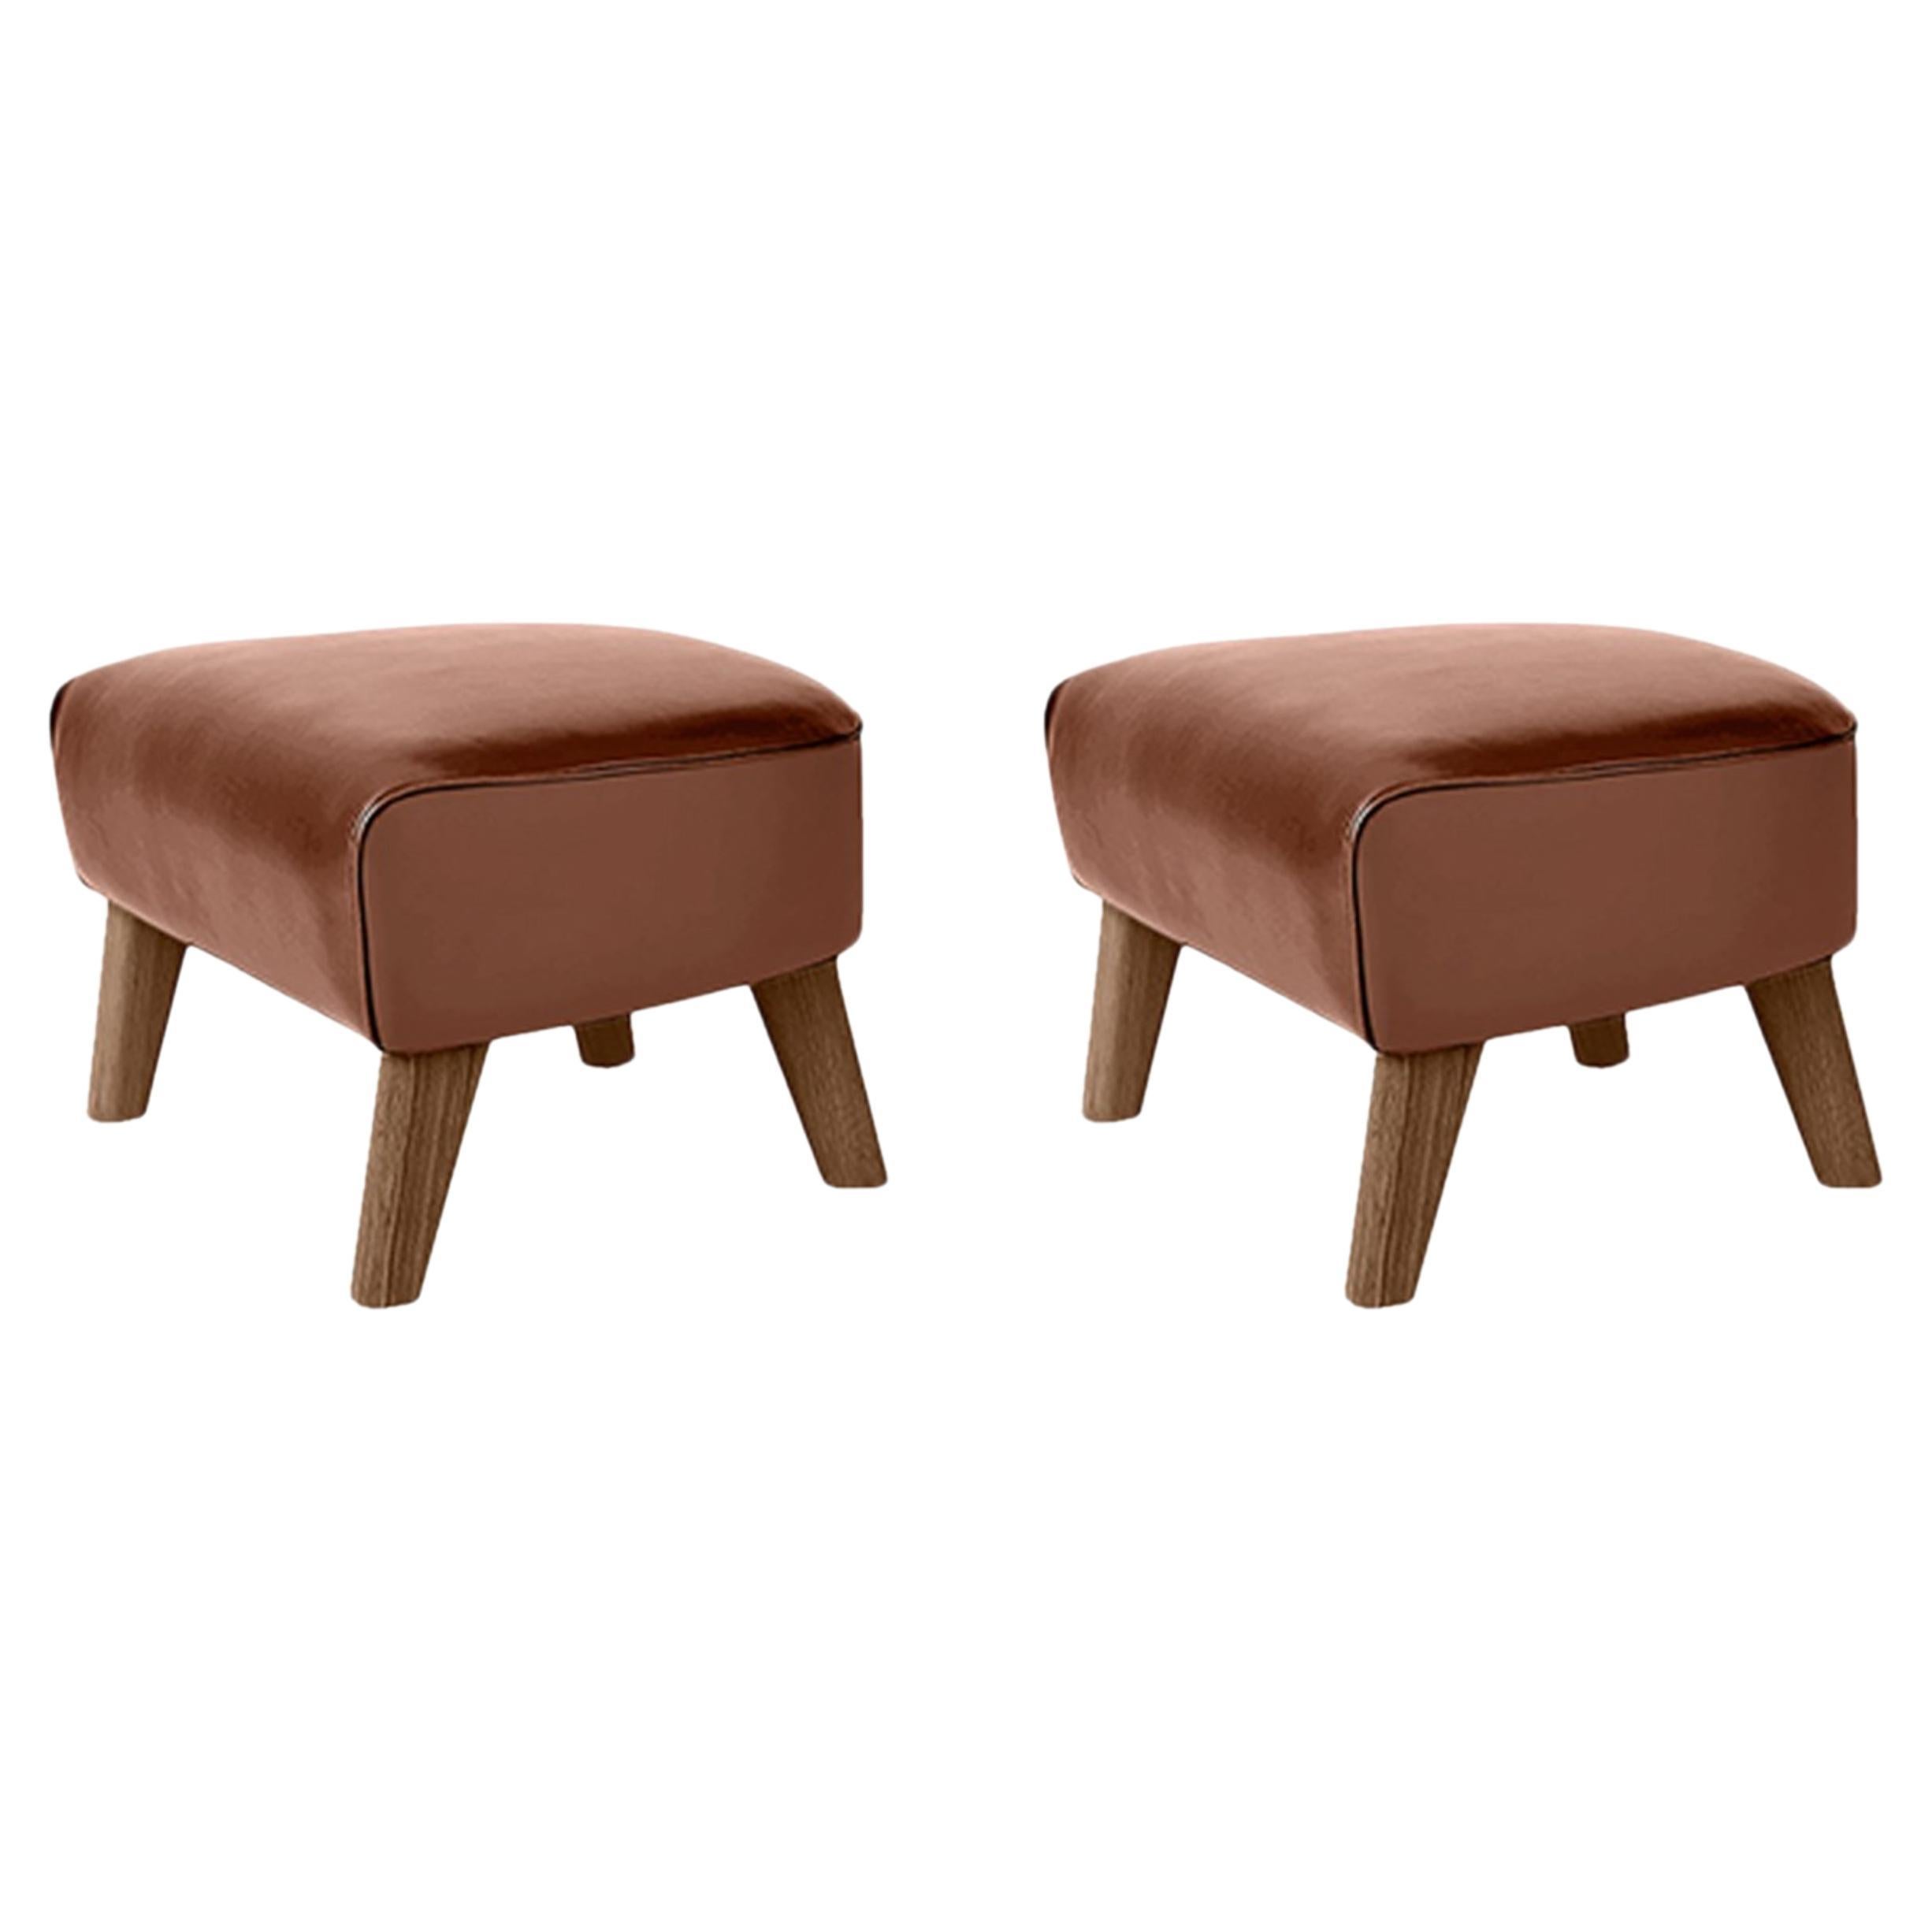 Set of 2 Brown Leather and Smoked Oak My Own Chair Footstools by Lassen